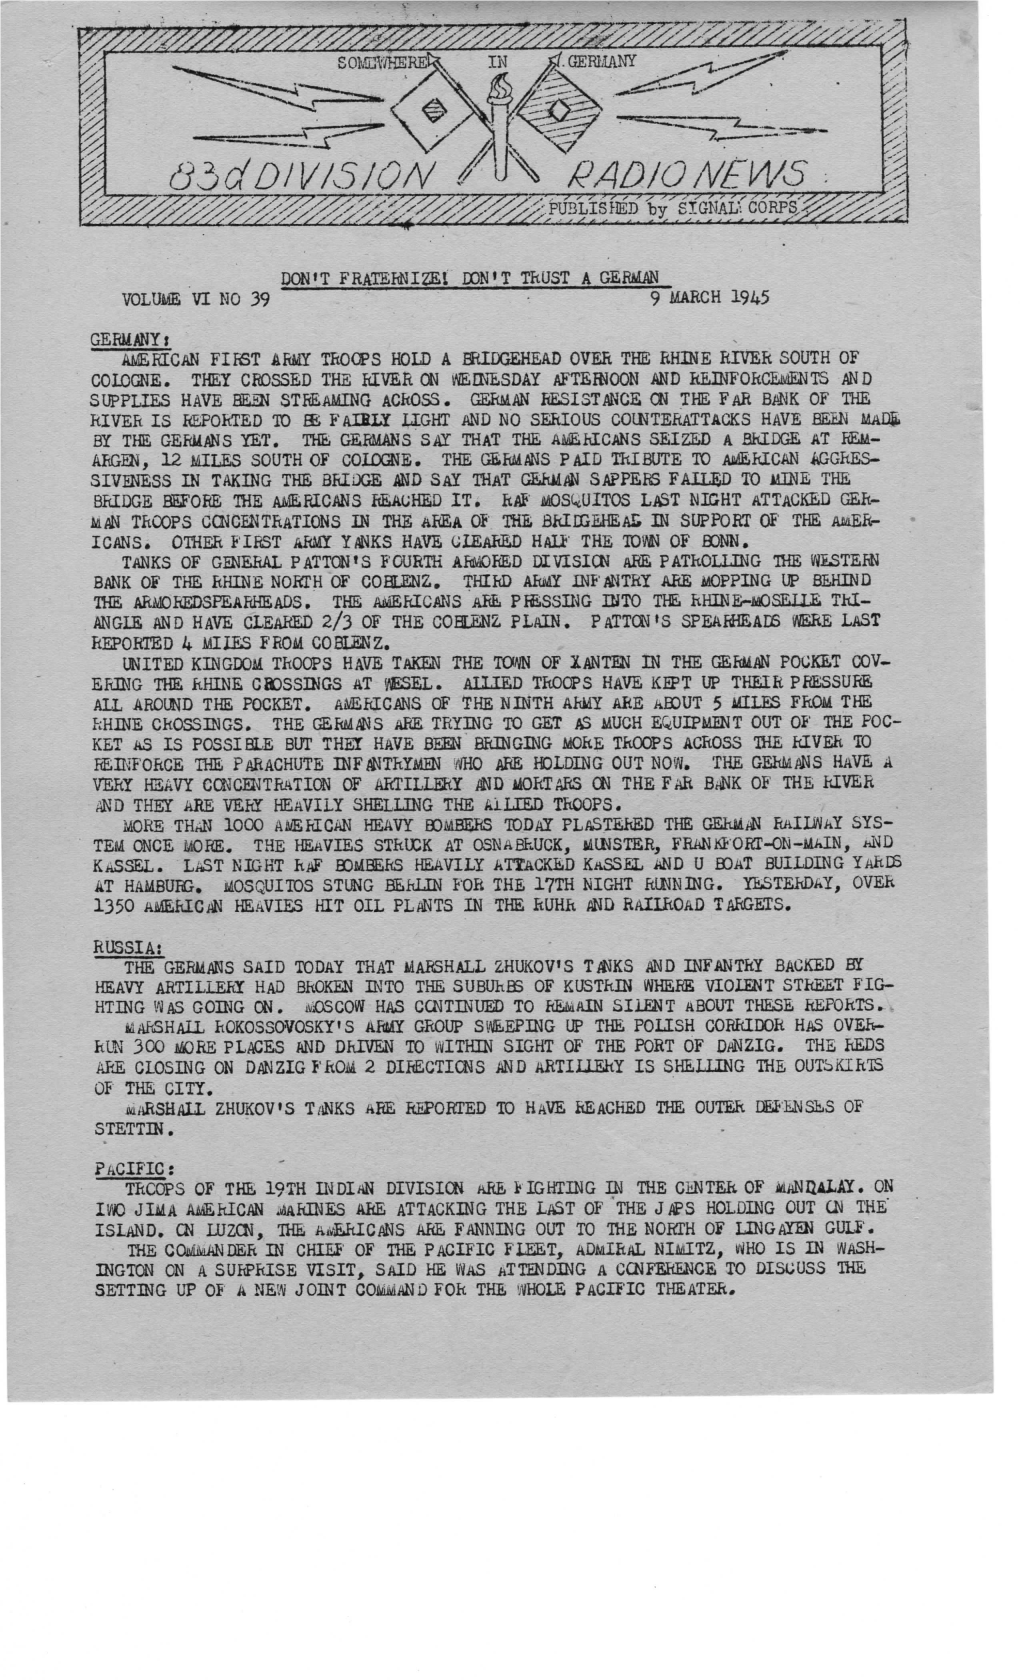 83Rd Division Radio News, Germany, Vol IV #39, March 9, 1945, One Page